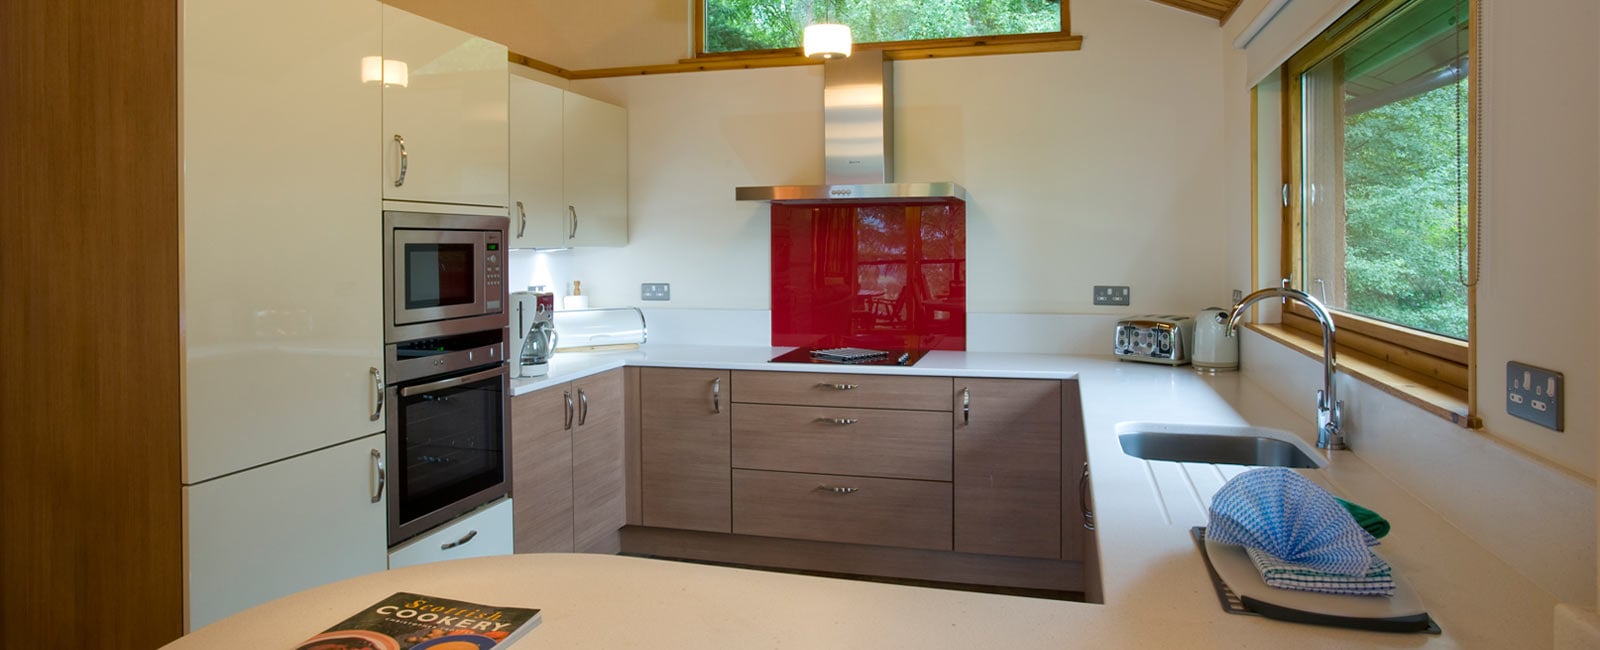 Kitchen at Craigendarroch Lodges, Managed by Hilton Grand Vacations in Royal Deeside, Scotland